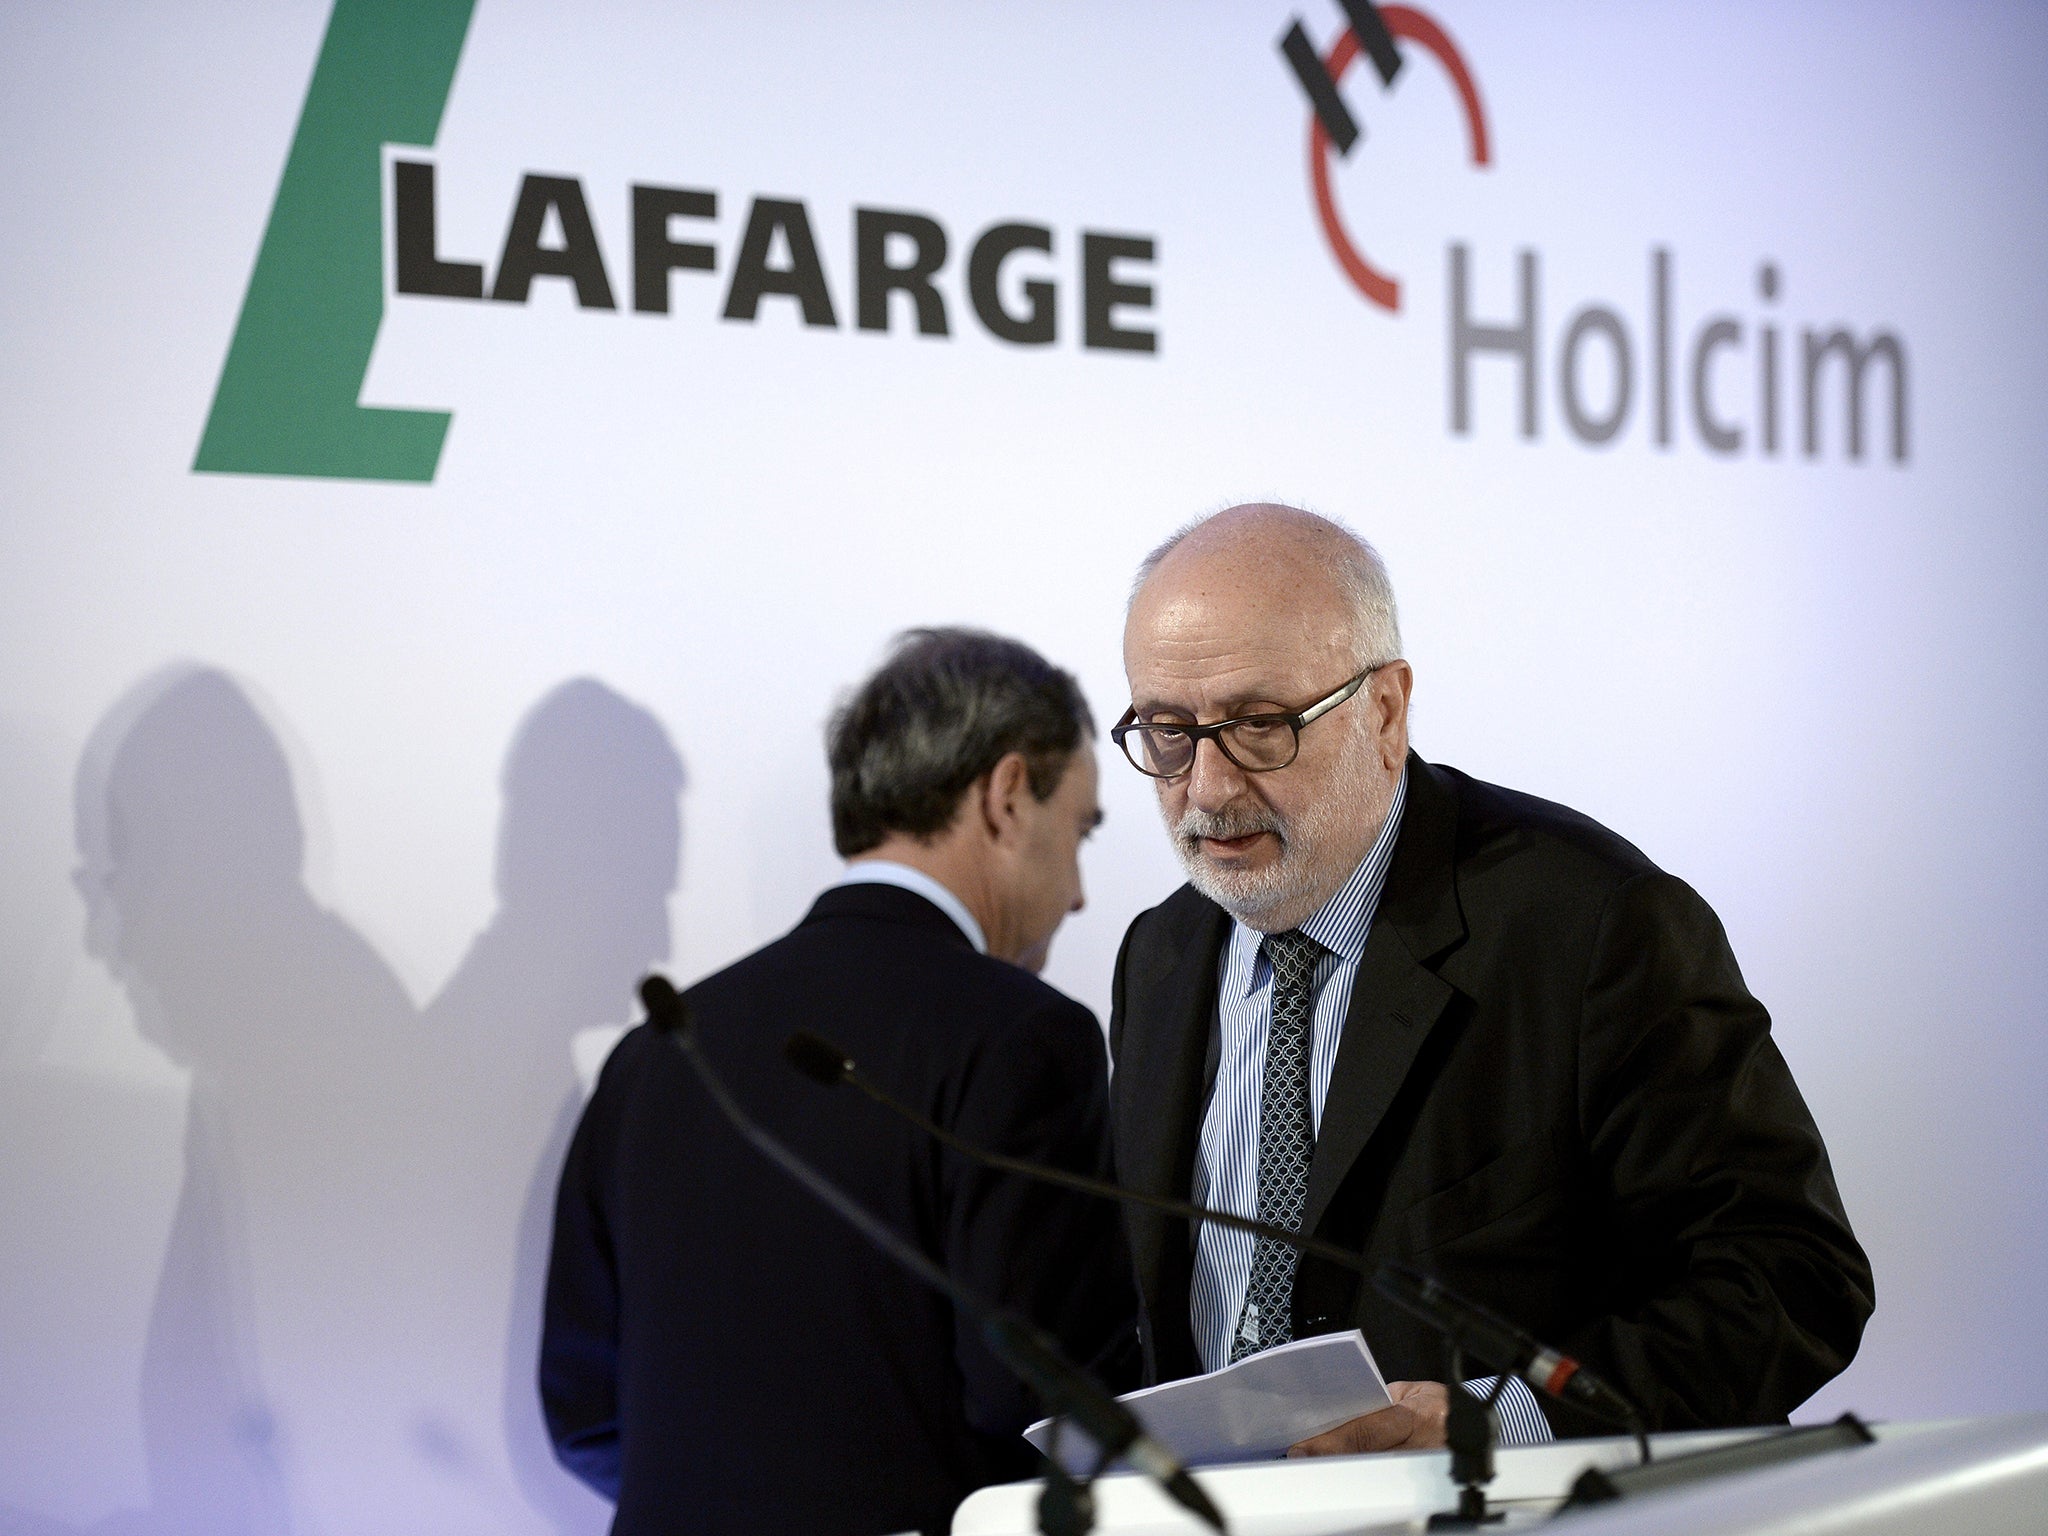 Rolf Soiron, right, chairman of the Board of Directors of Swiss firm, Holcim, with CEO of Lafarge, Bruno Lafont last year